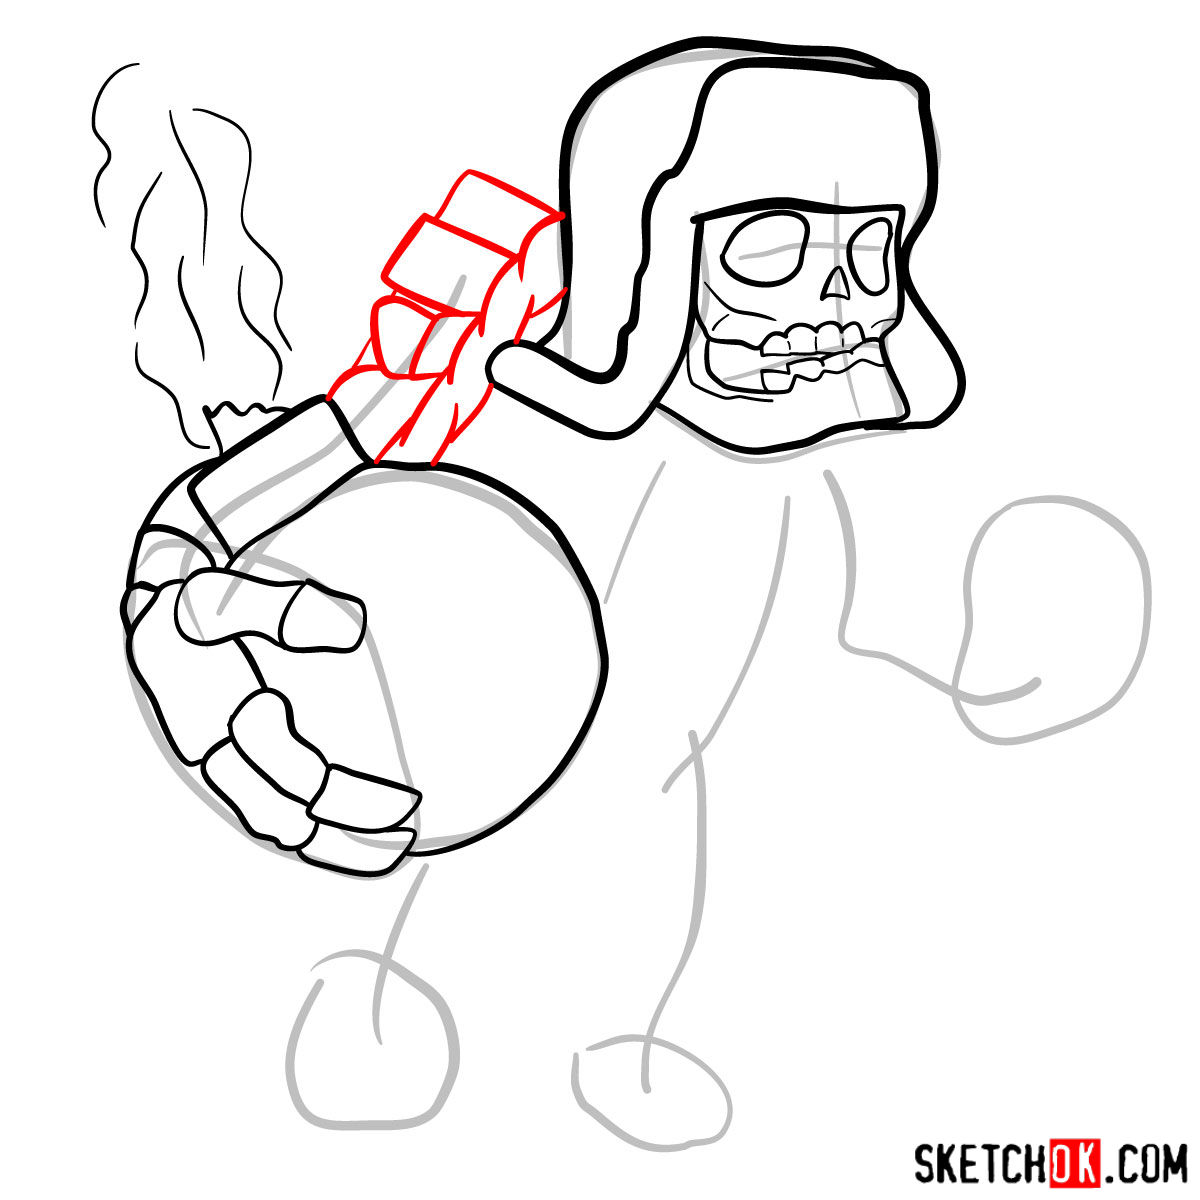 How to draw Giant Skeleton from Clash of Clans - step 06